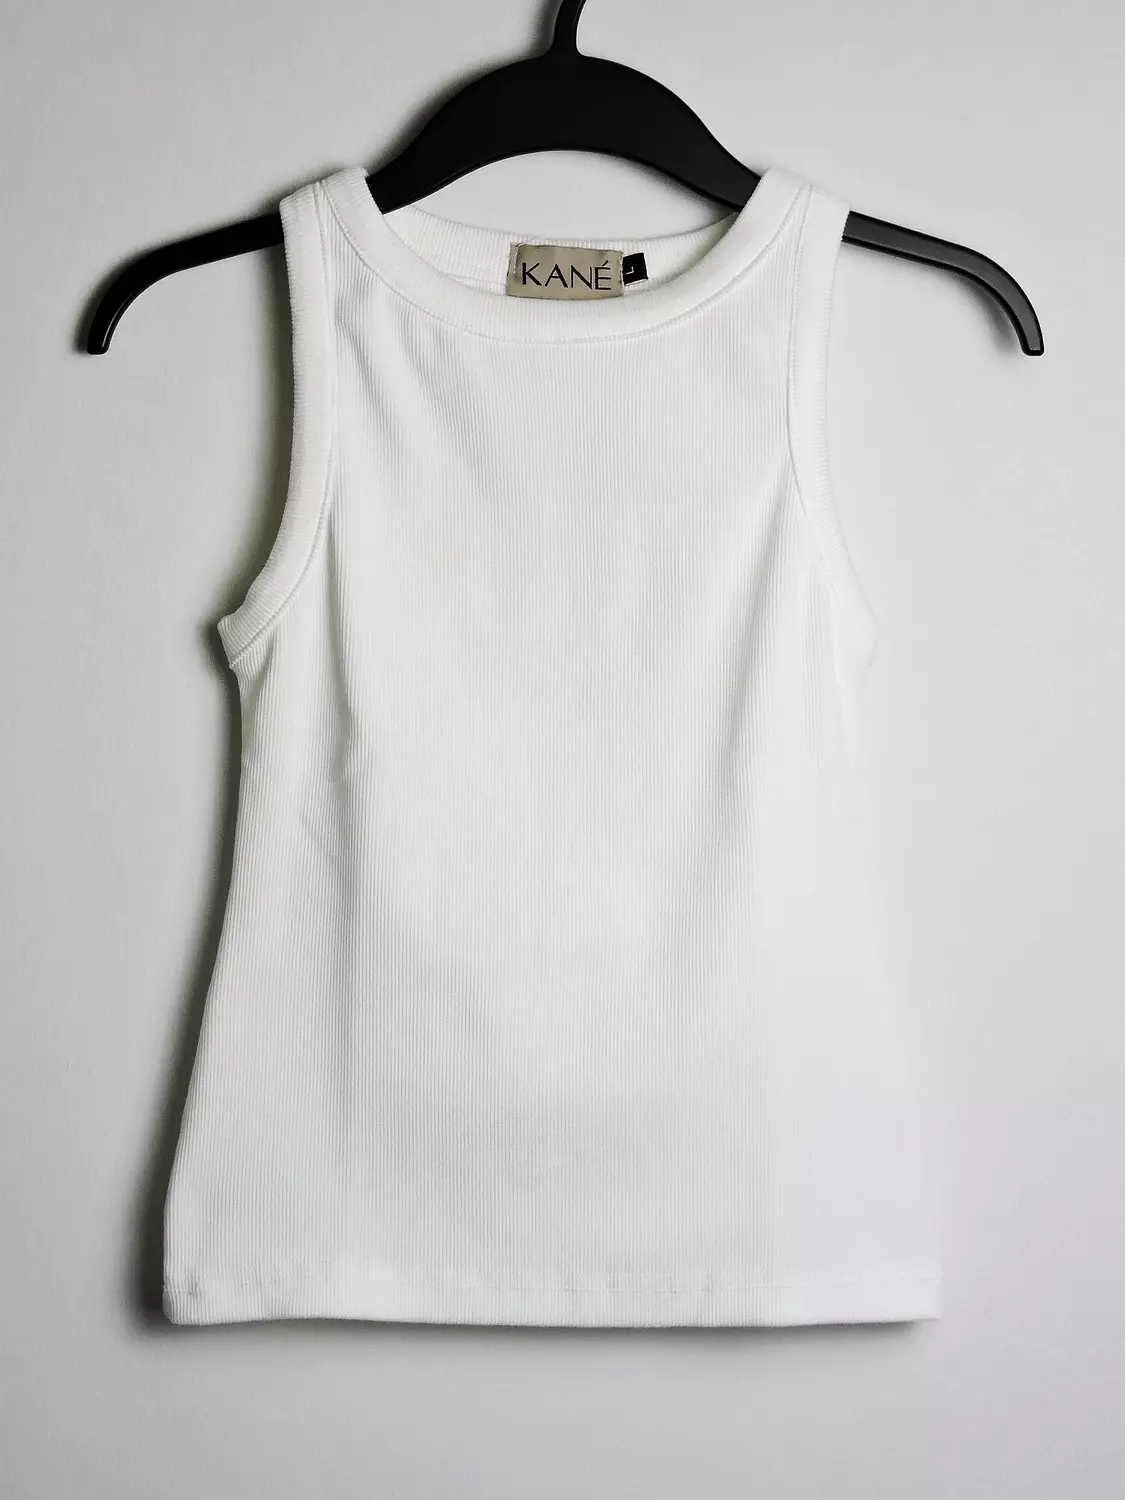 The White Tank Top hover image